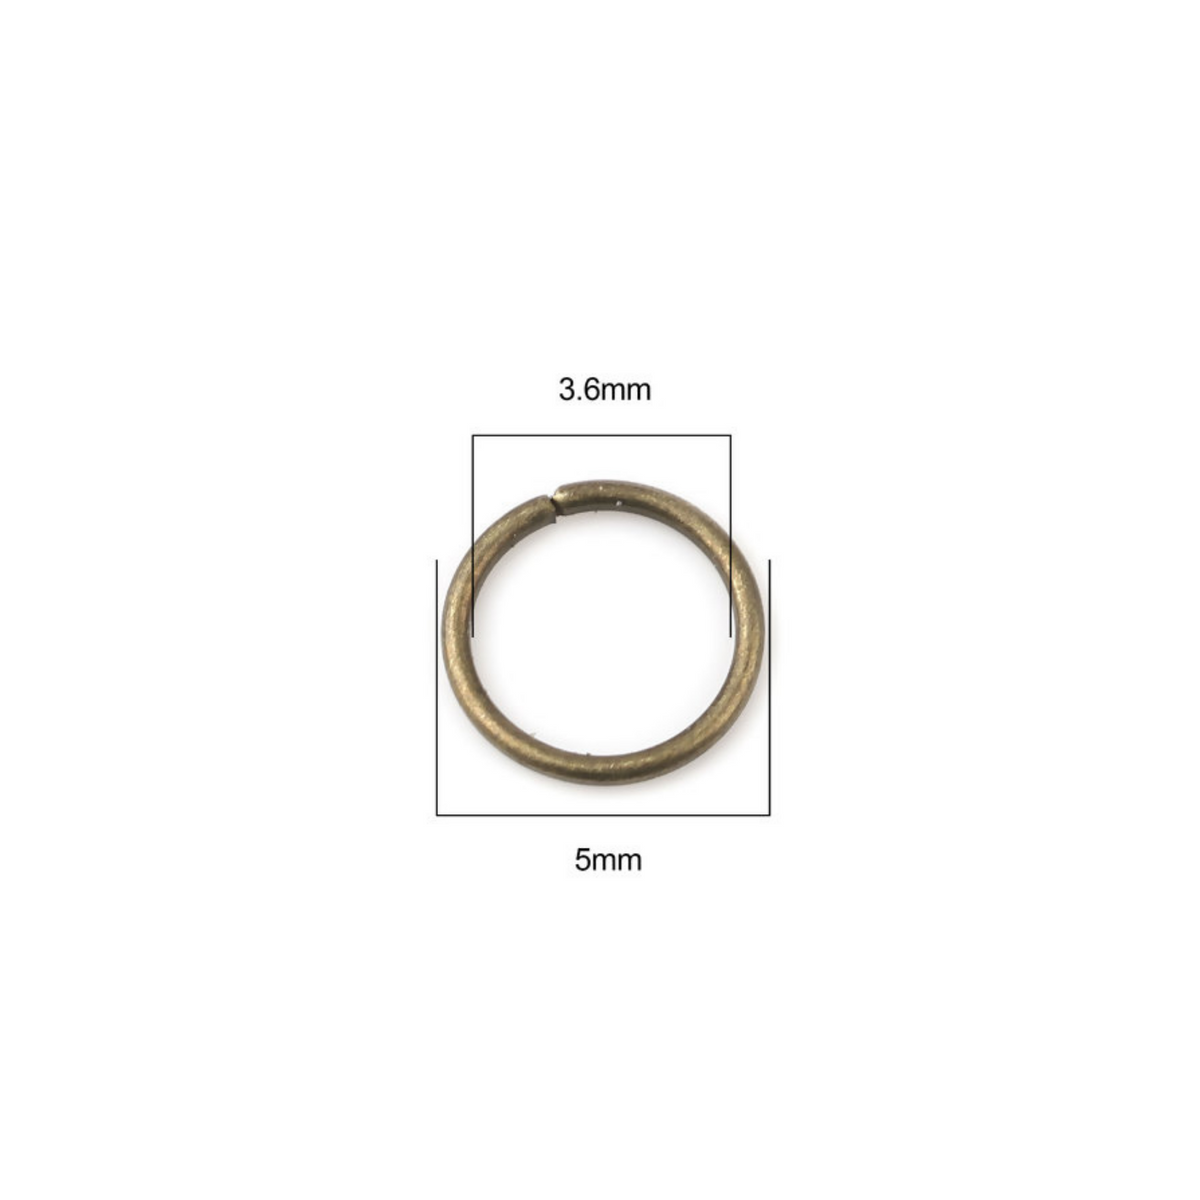 Stainless Steel 6mm Jump Rings  Jewelry Making Supplies Bulk – Small  Devotions